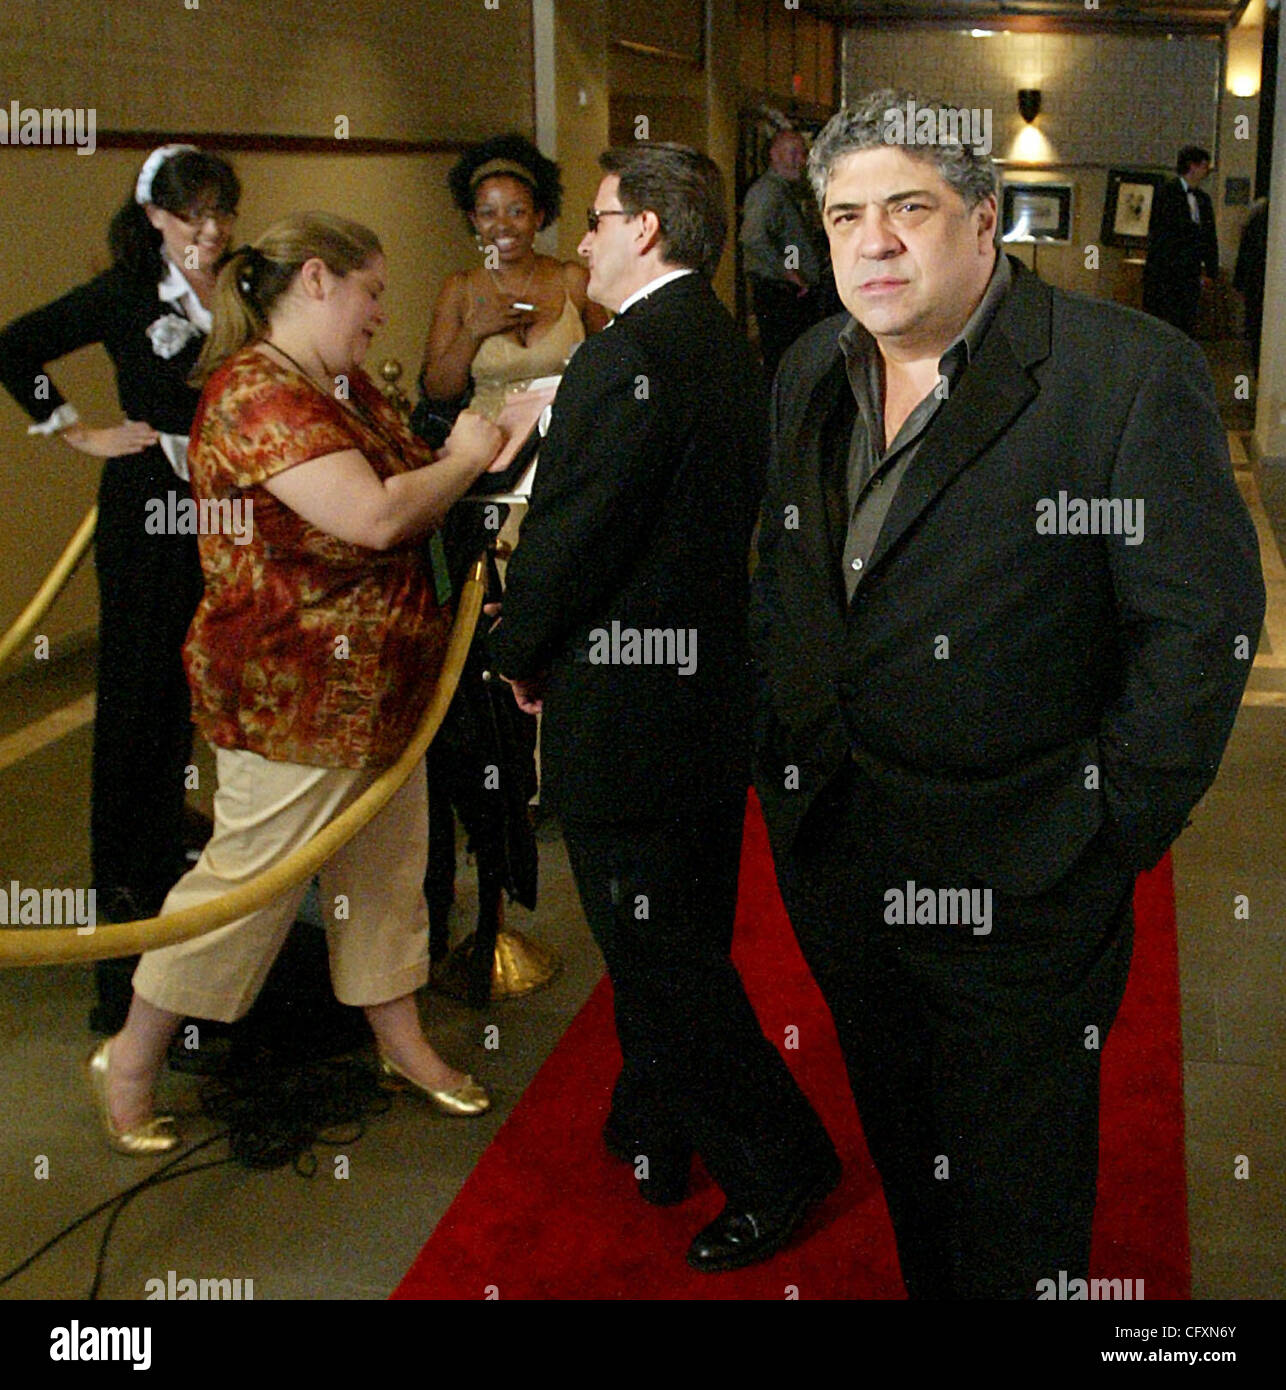 042107 met Filmfest   Photo by Damon Higgins/The Palm Beach Post  0036840A - BOCA RATON - W/STORY BY HAP ERSTEIN - Sopranos star Vincent Pastore makes an entrance on the red carpet at the Boca Raton Resort & Club for the 2007 Palm Beach International Film Festival.  ....042107 Stock Photo